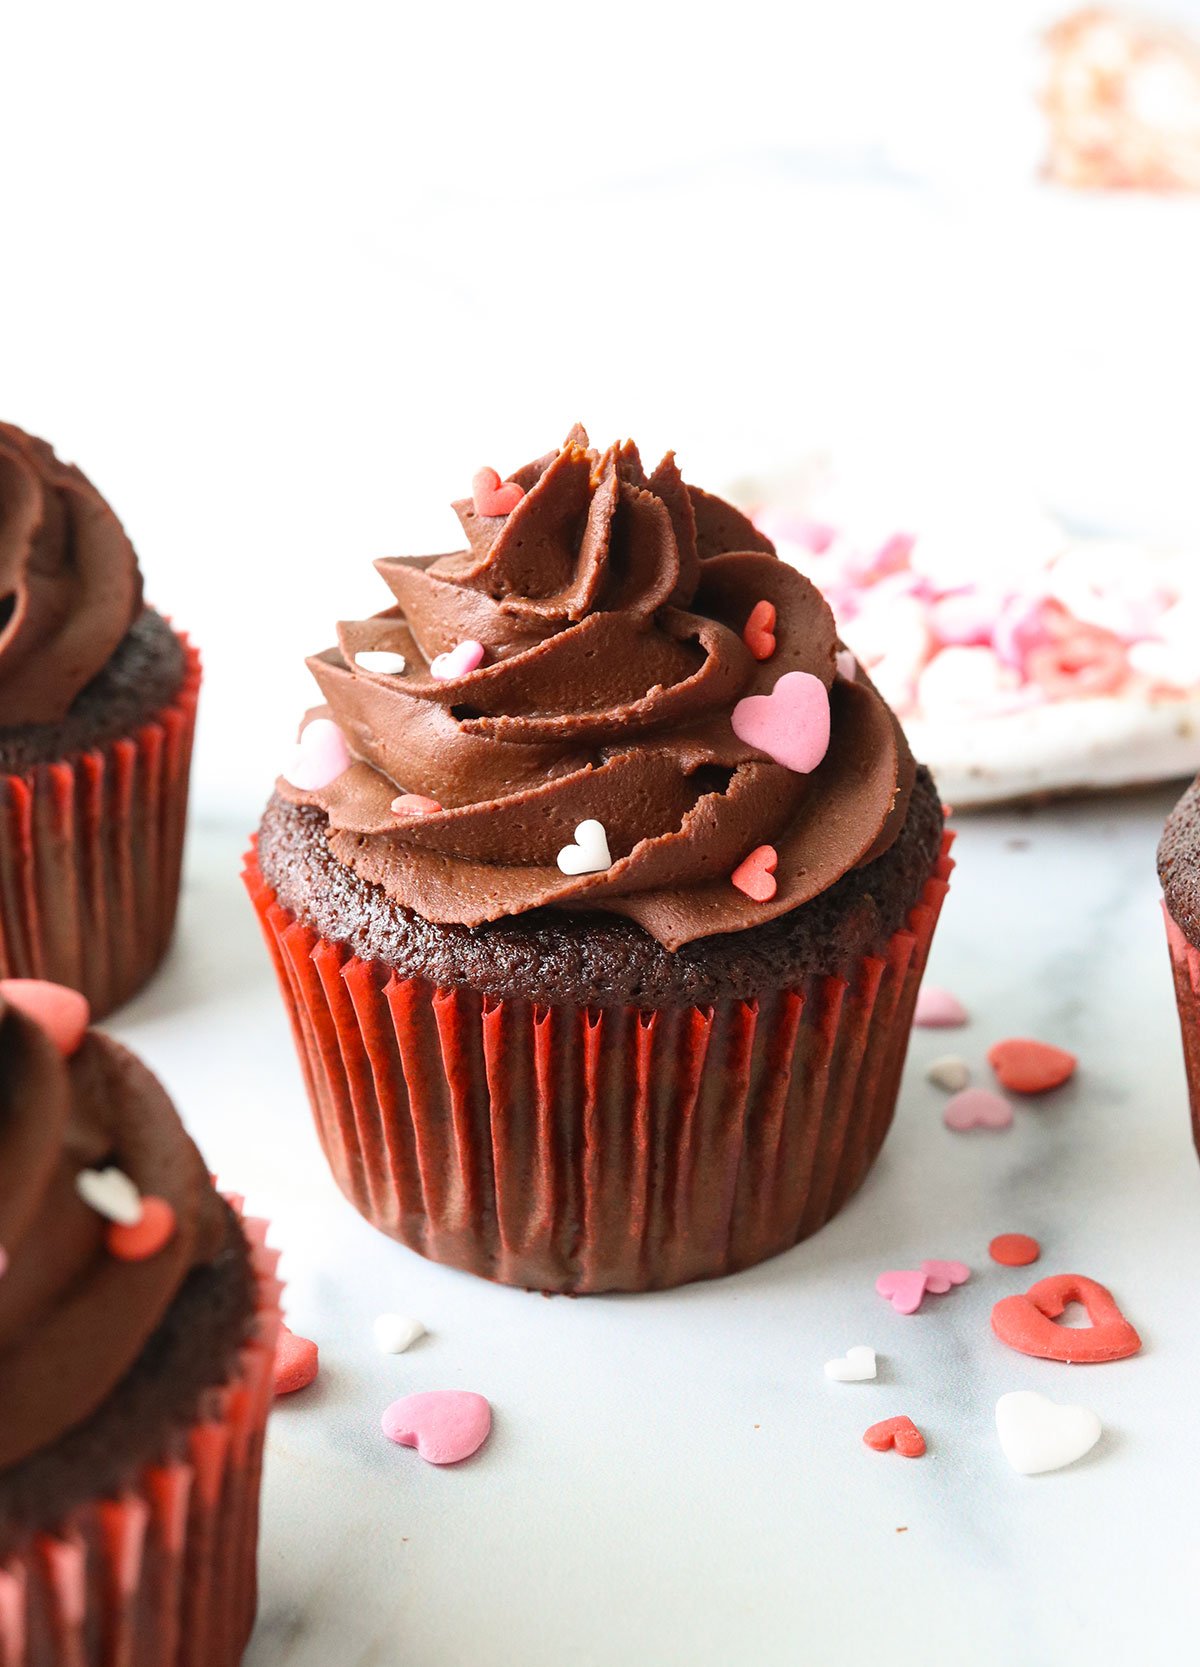 Chocolate almond flour cupcake topped with frosting and heart sprinkles.